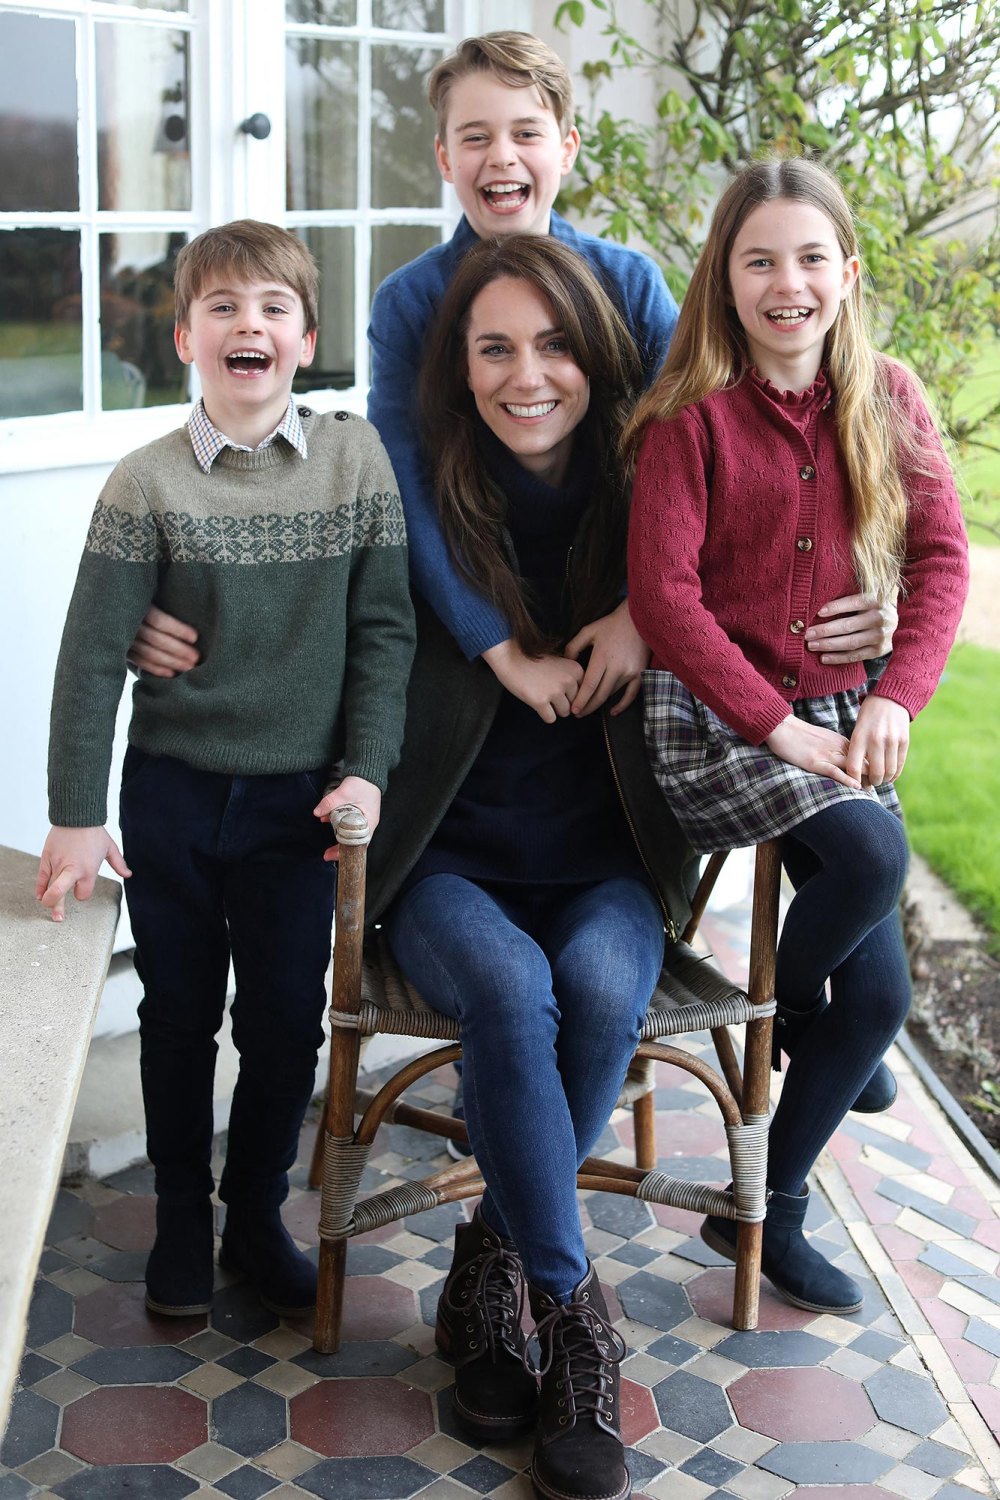 Another photo of the royal family, taken by Kate Middleton, was manipulated